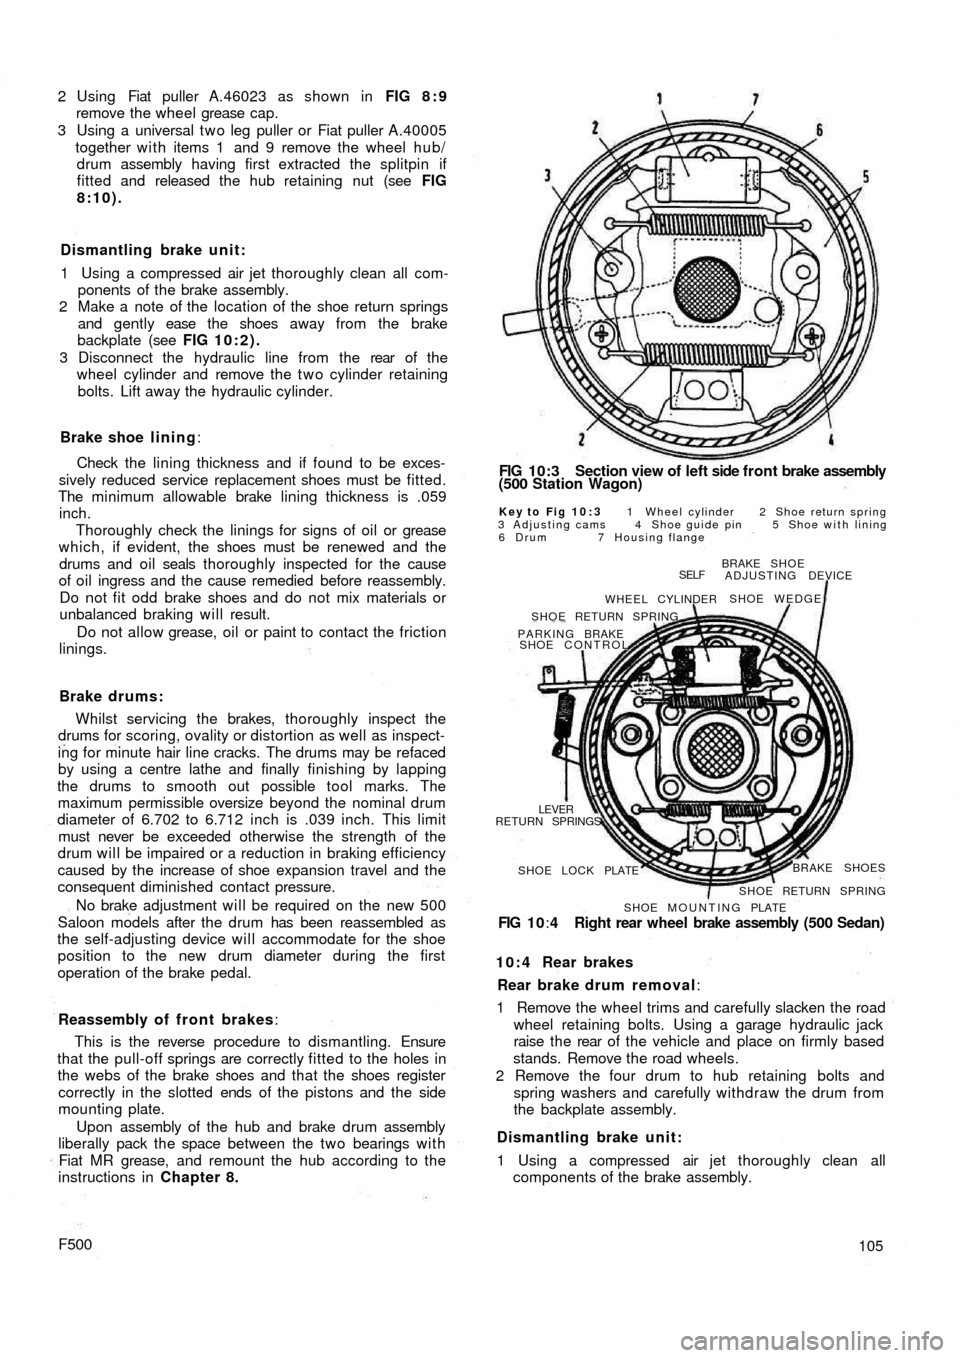 FIAT 500 1967 1.G Workshop Manual 2 Using  Fiat puller A.46023 as shown in FIG 8 : 9
remove the wheel grease cap.
3 Using a universal t w o leg puller or Fiat puller A.40005
together w i t h items 1  and 9 remove the wheel hub/
drum a